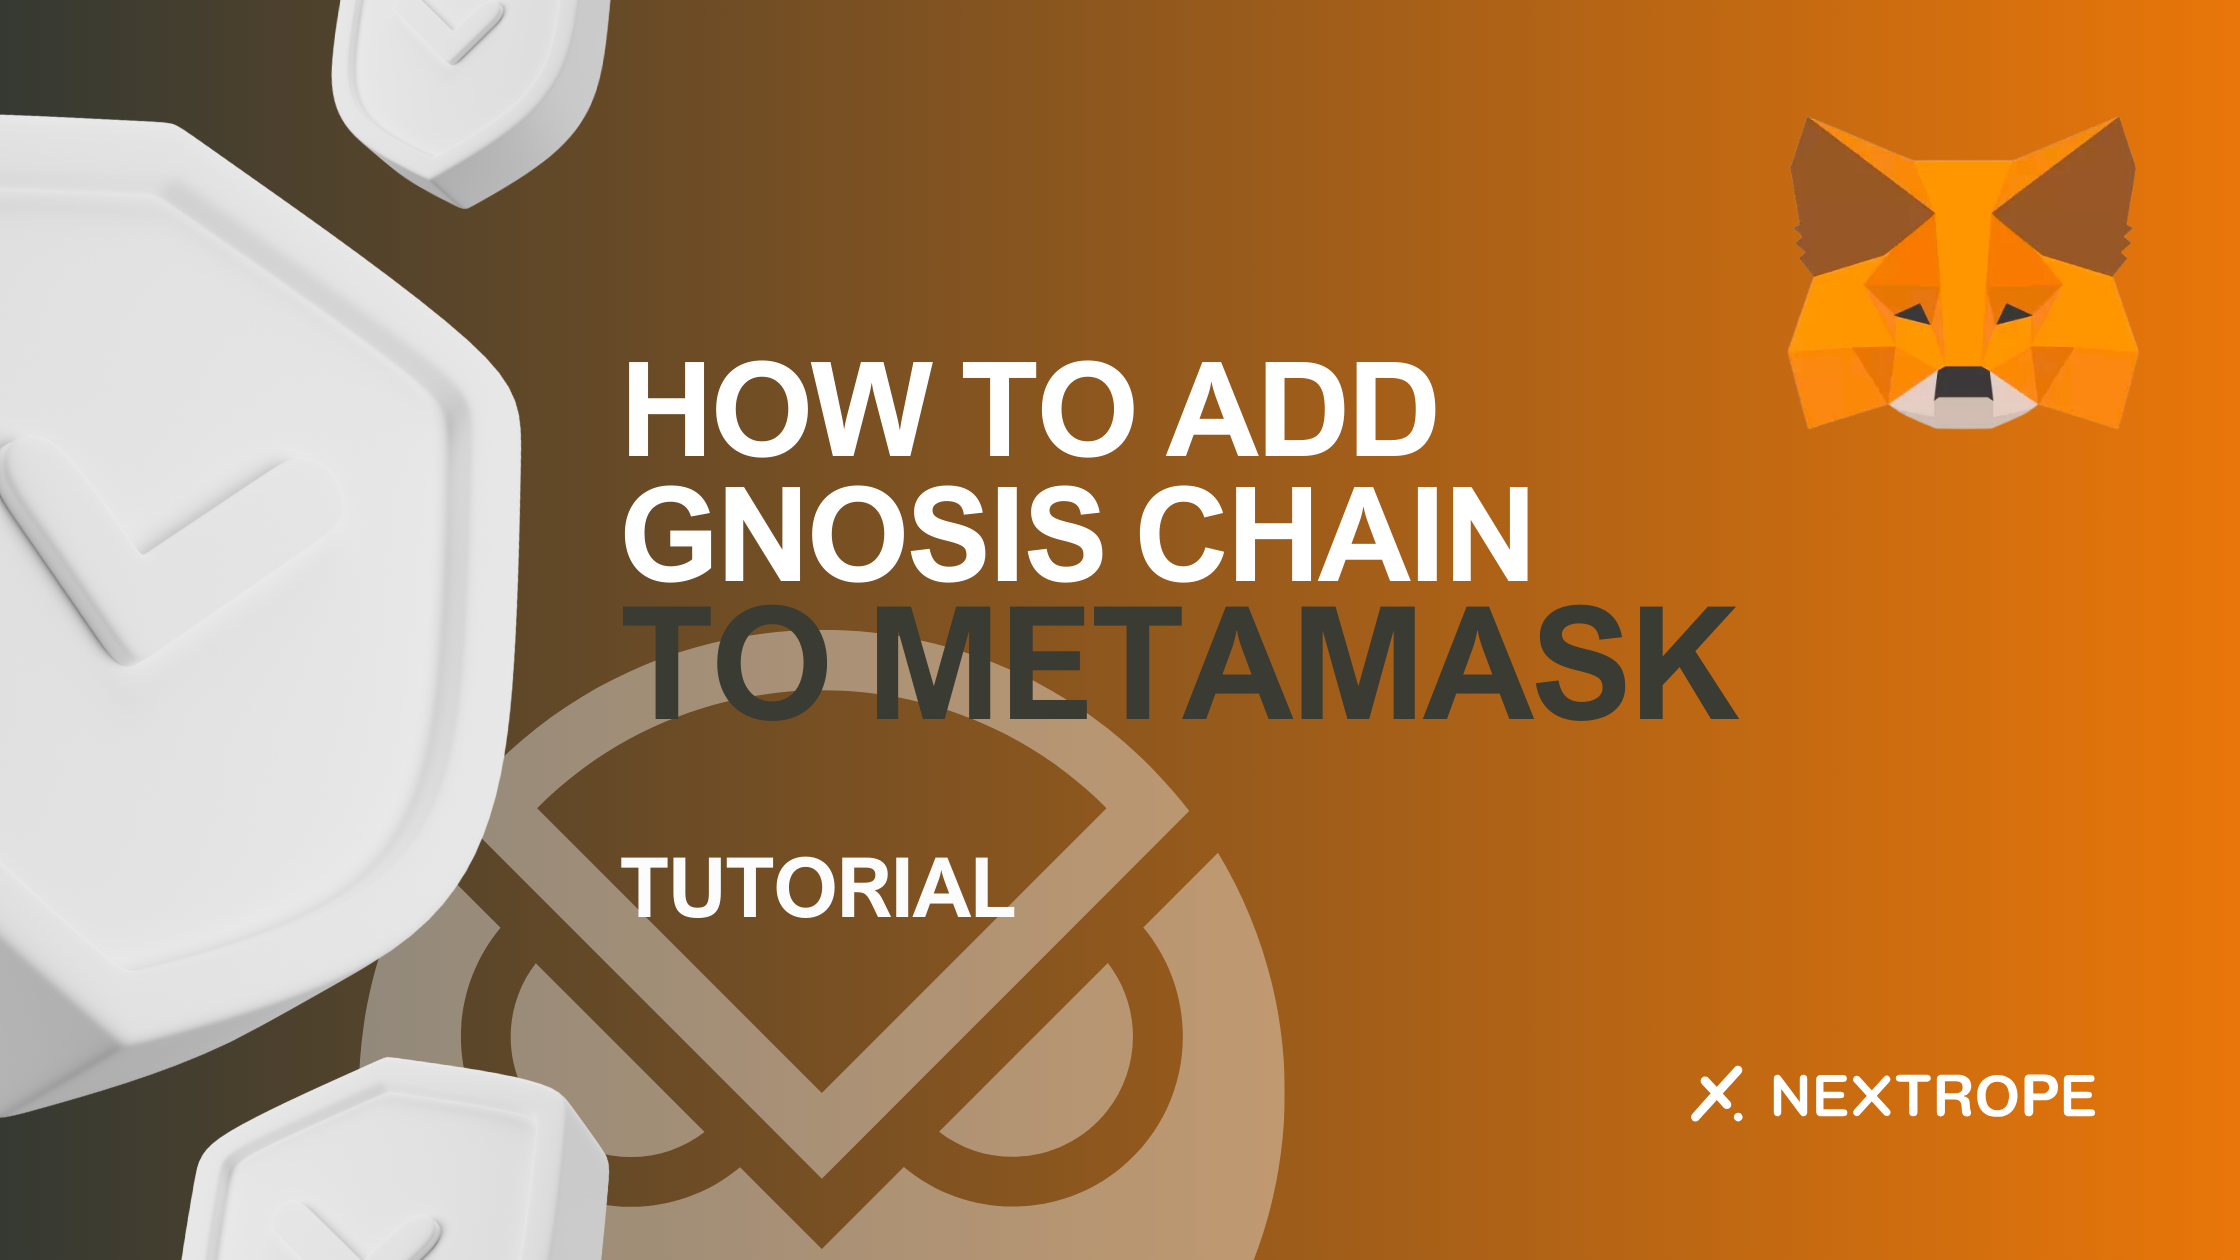 How to Add Gnosis Chain to MetaMask: A Simple Tutorial